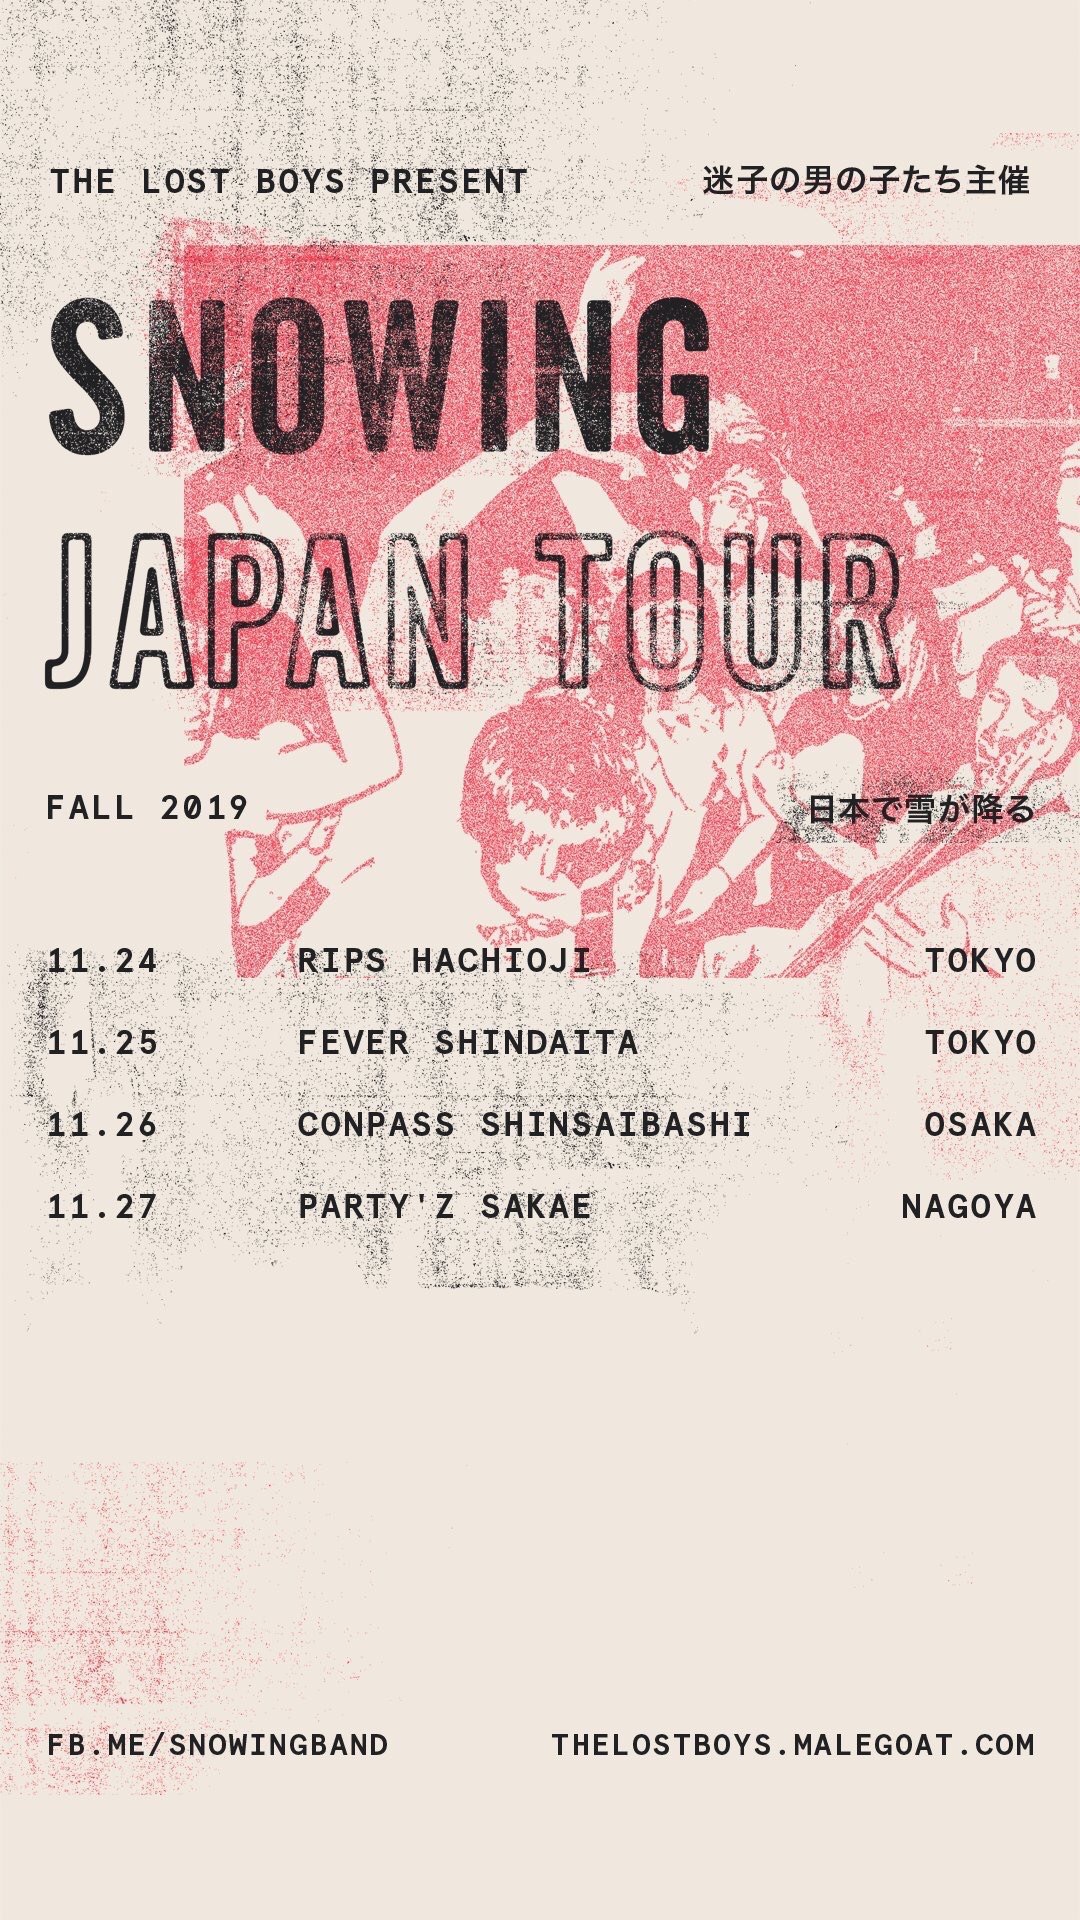 The Lost Boys presents Snowing Japan Tour 2019